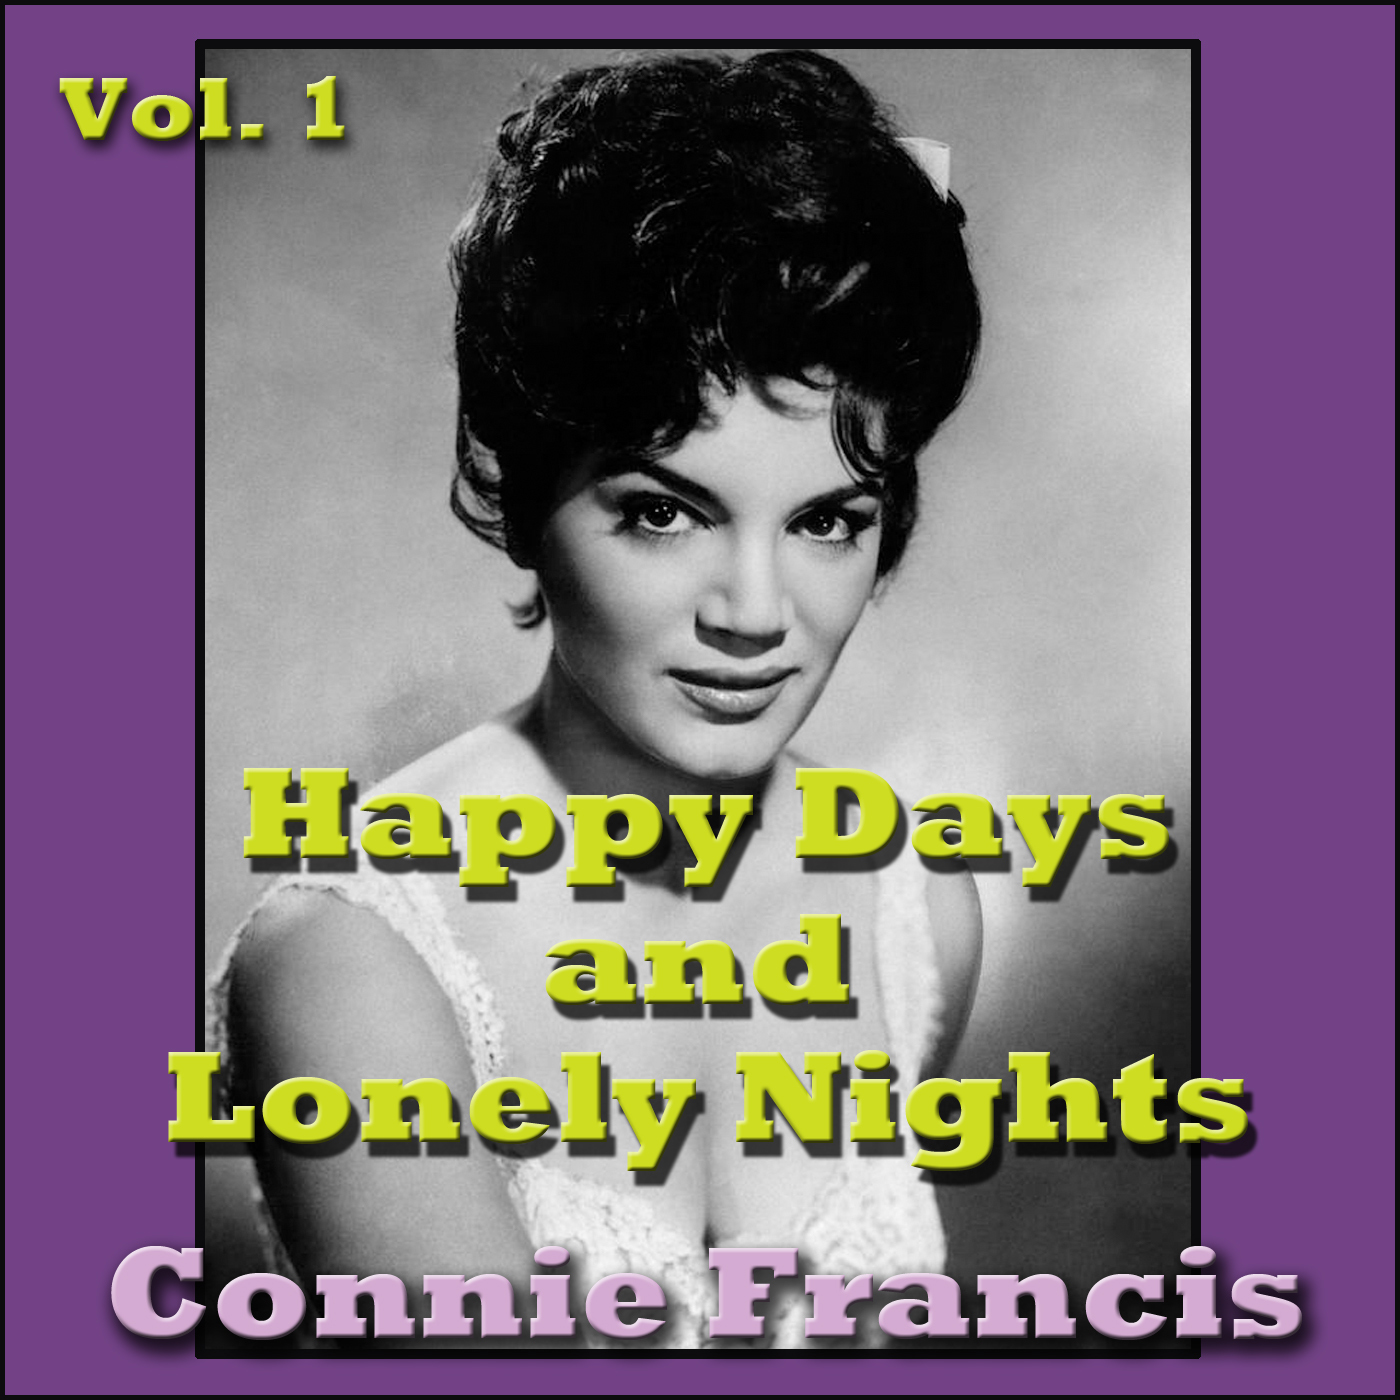 Happy Days and Lonely Nights, Vol. 1